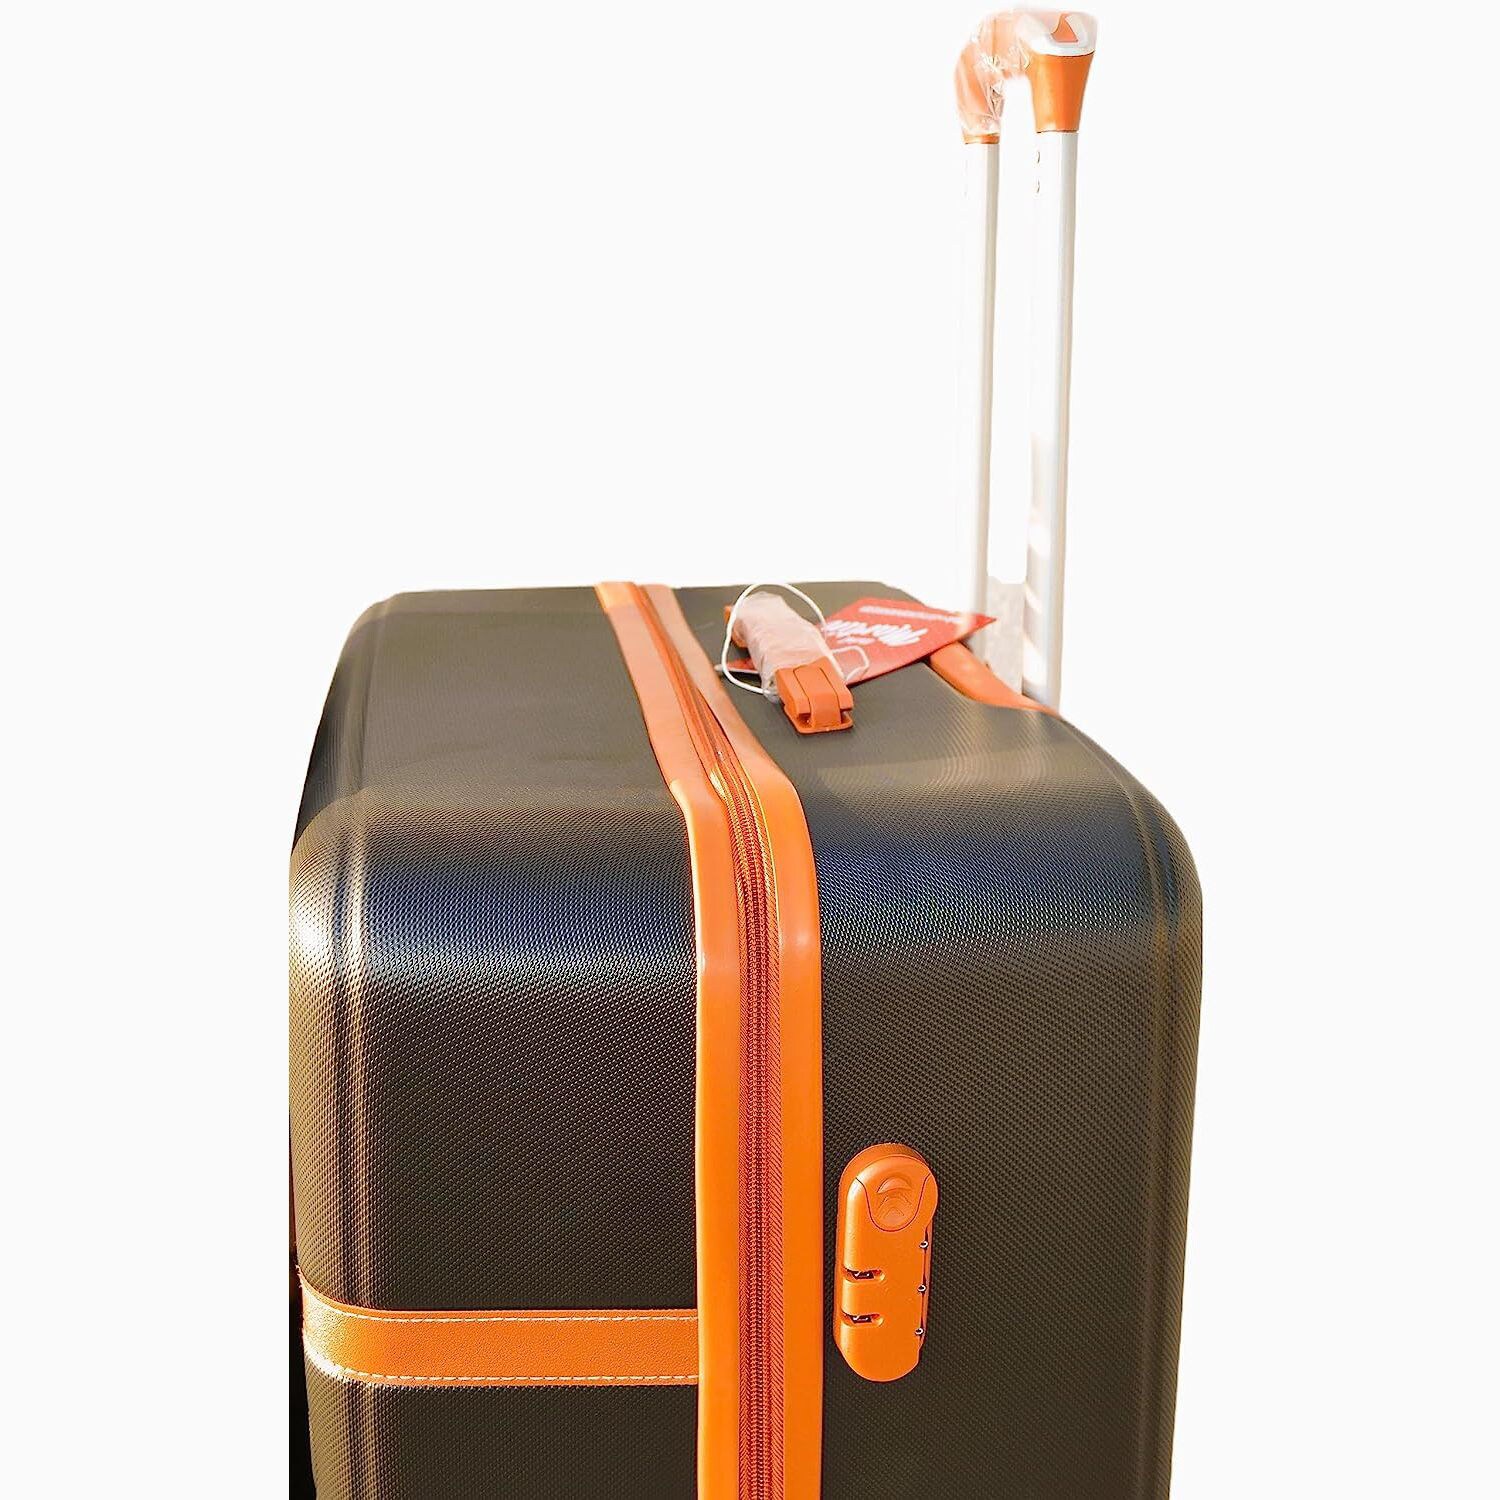 Abs Travel Luggage Trolley Set with Beauty Case (5 Pcs) in Dubai, UAE